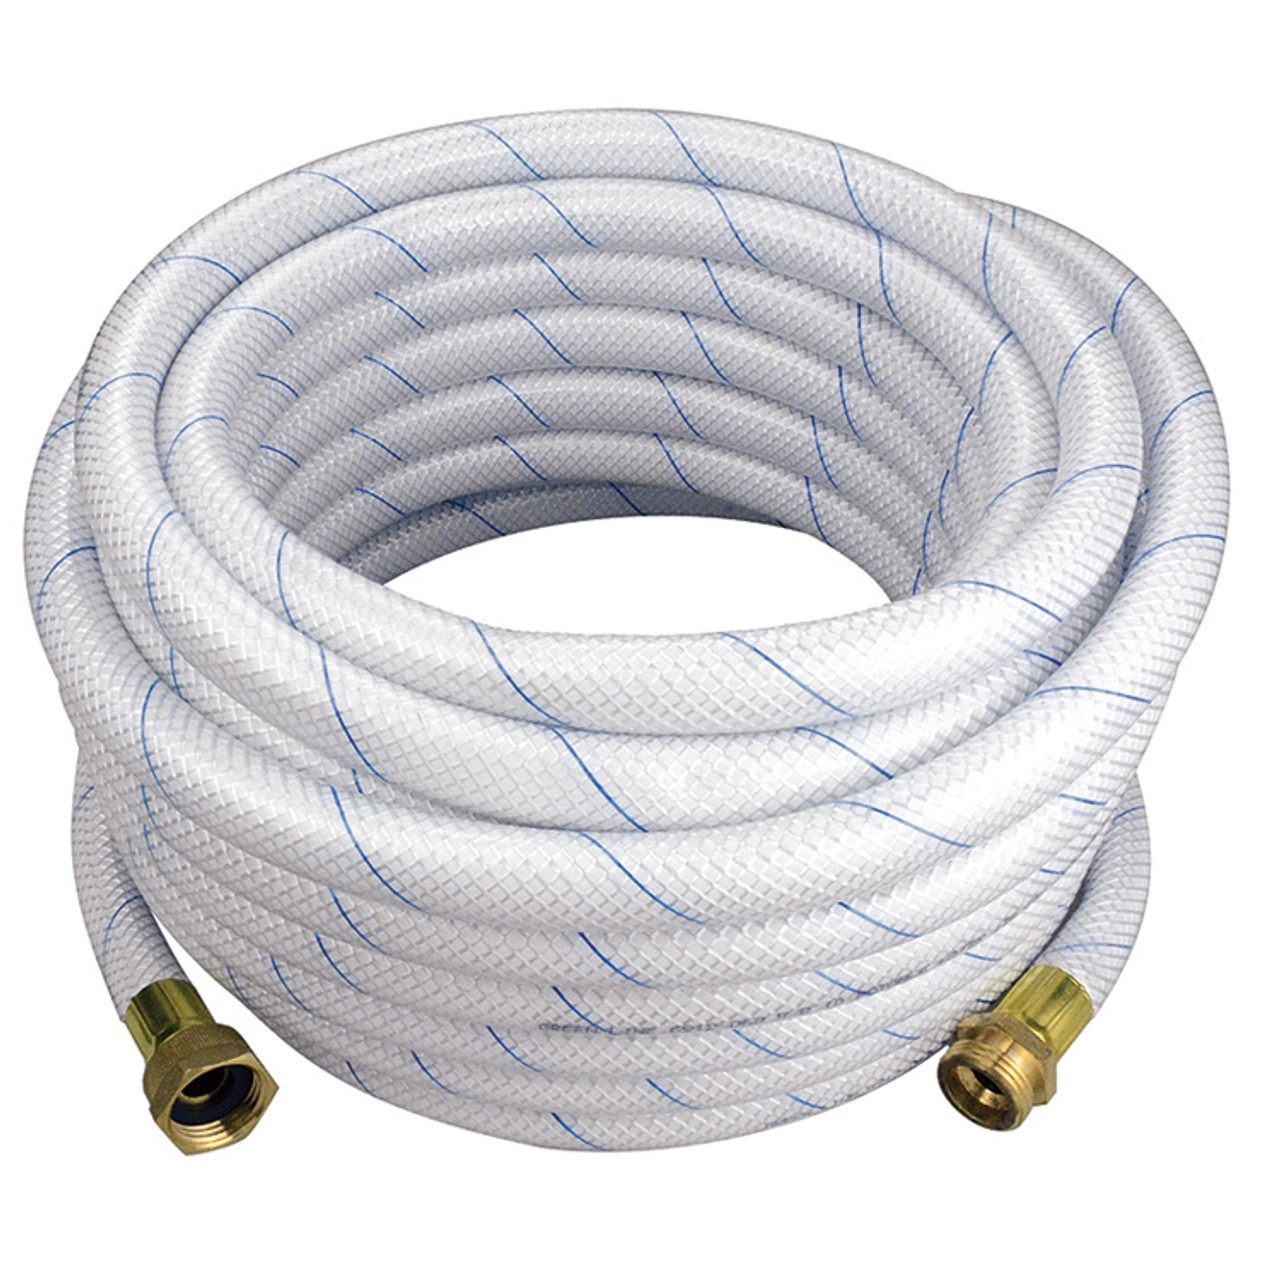 1/2" x 50' Potable Water Hose Assembly   G912-050GHT50